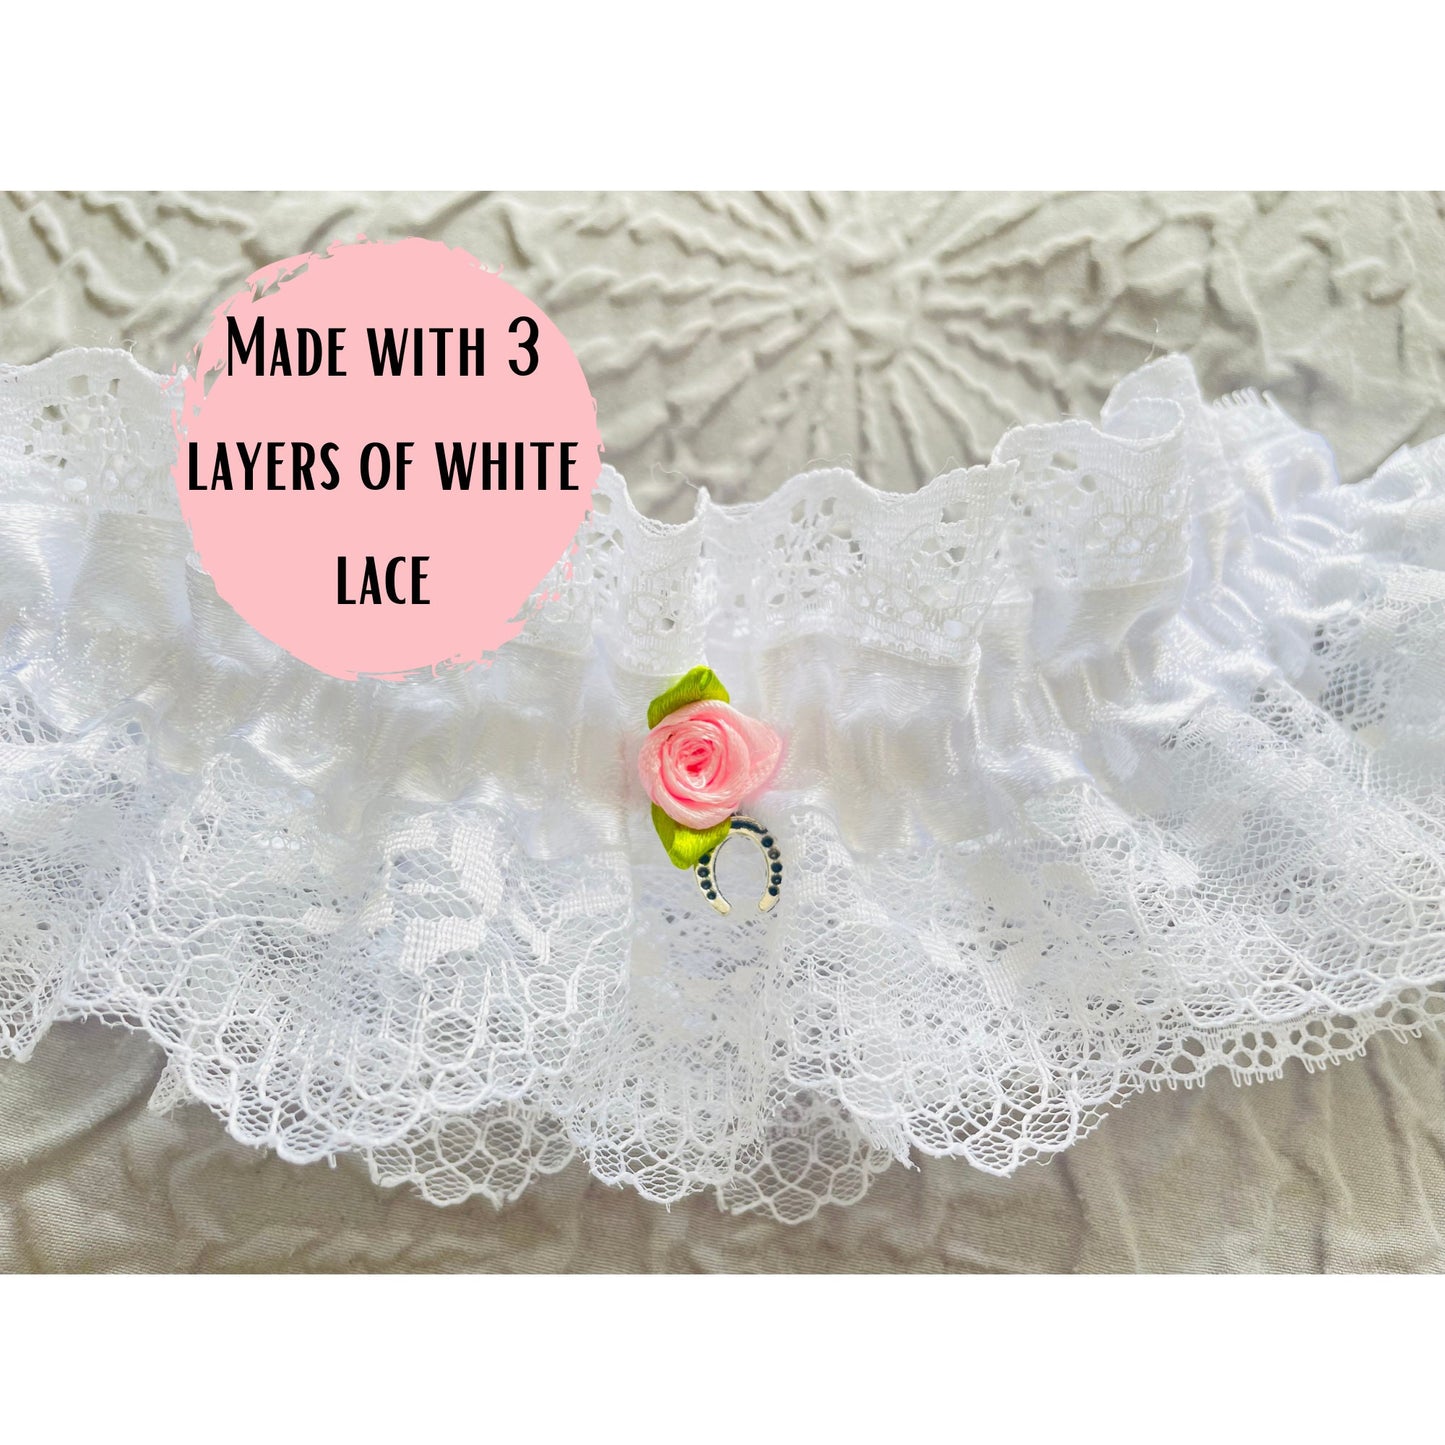 Pink Rosebud Wedding Day Garter Lovecore Blush Pink Floral White Layered Lace Elasticated Wedding Day Gift for Bride Lucky Horseshoe Charm